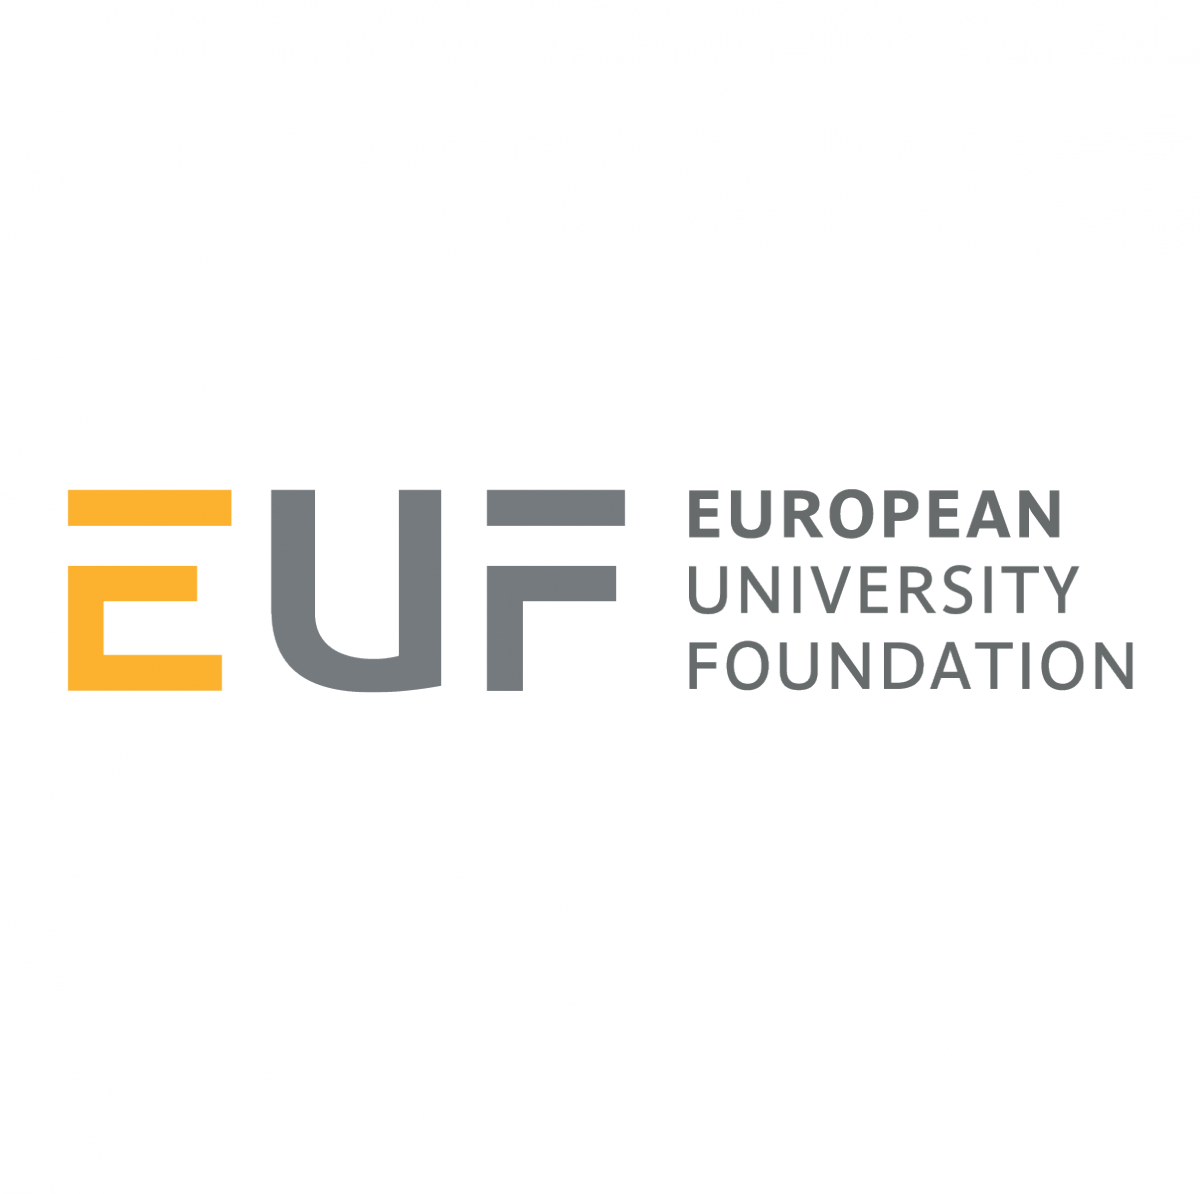 EUF stands for diversity and social fairness in Higher Education... 